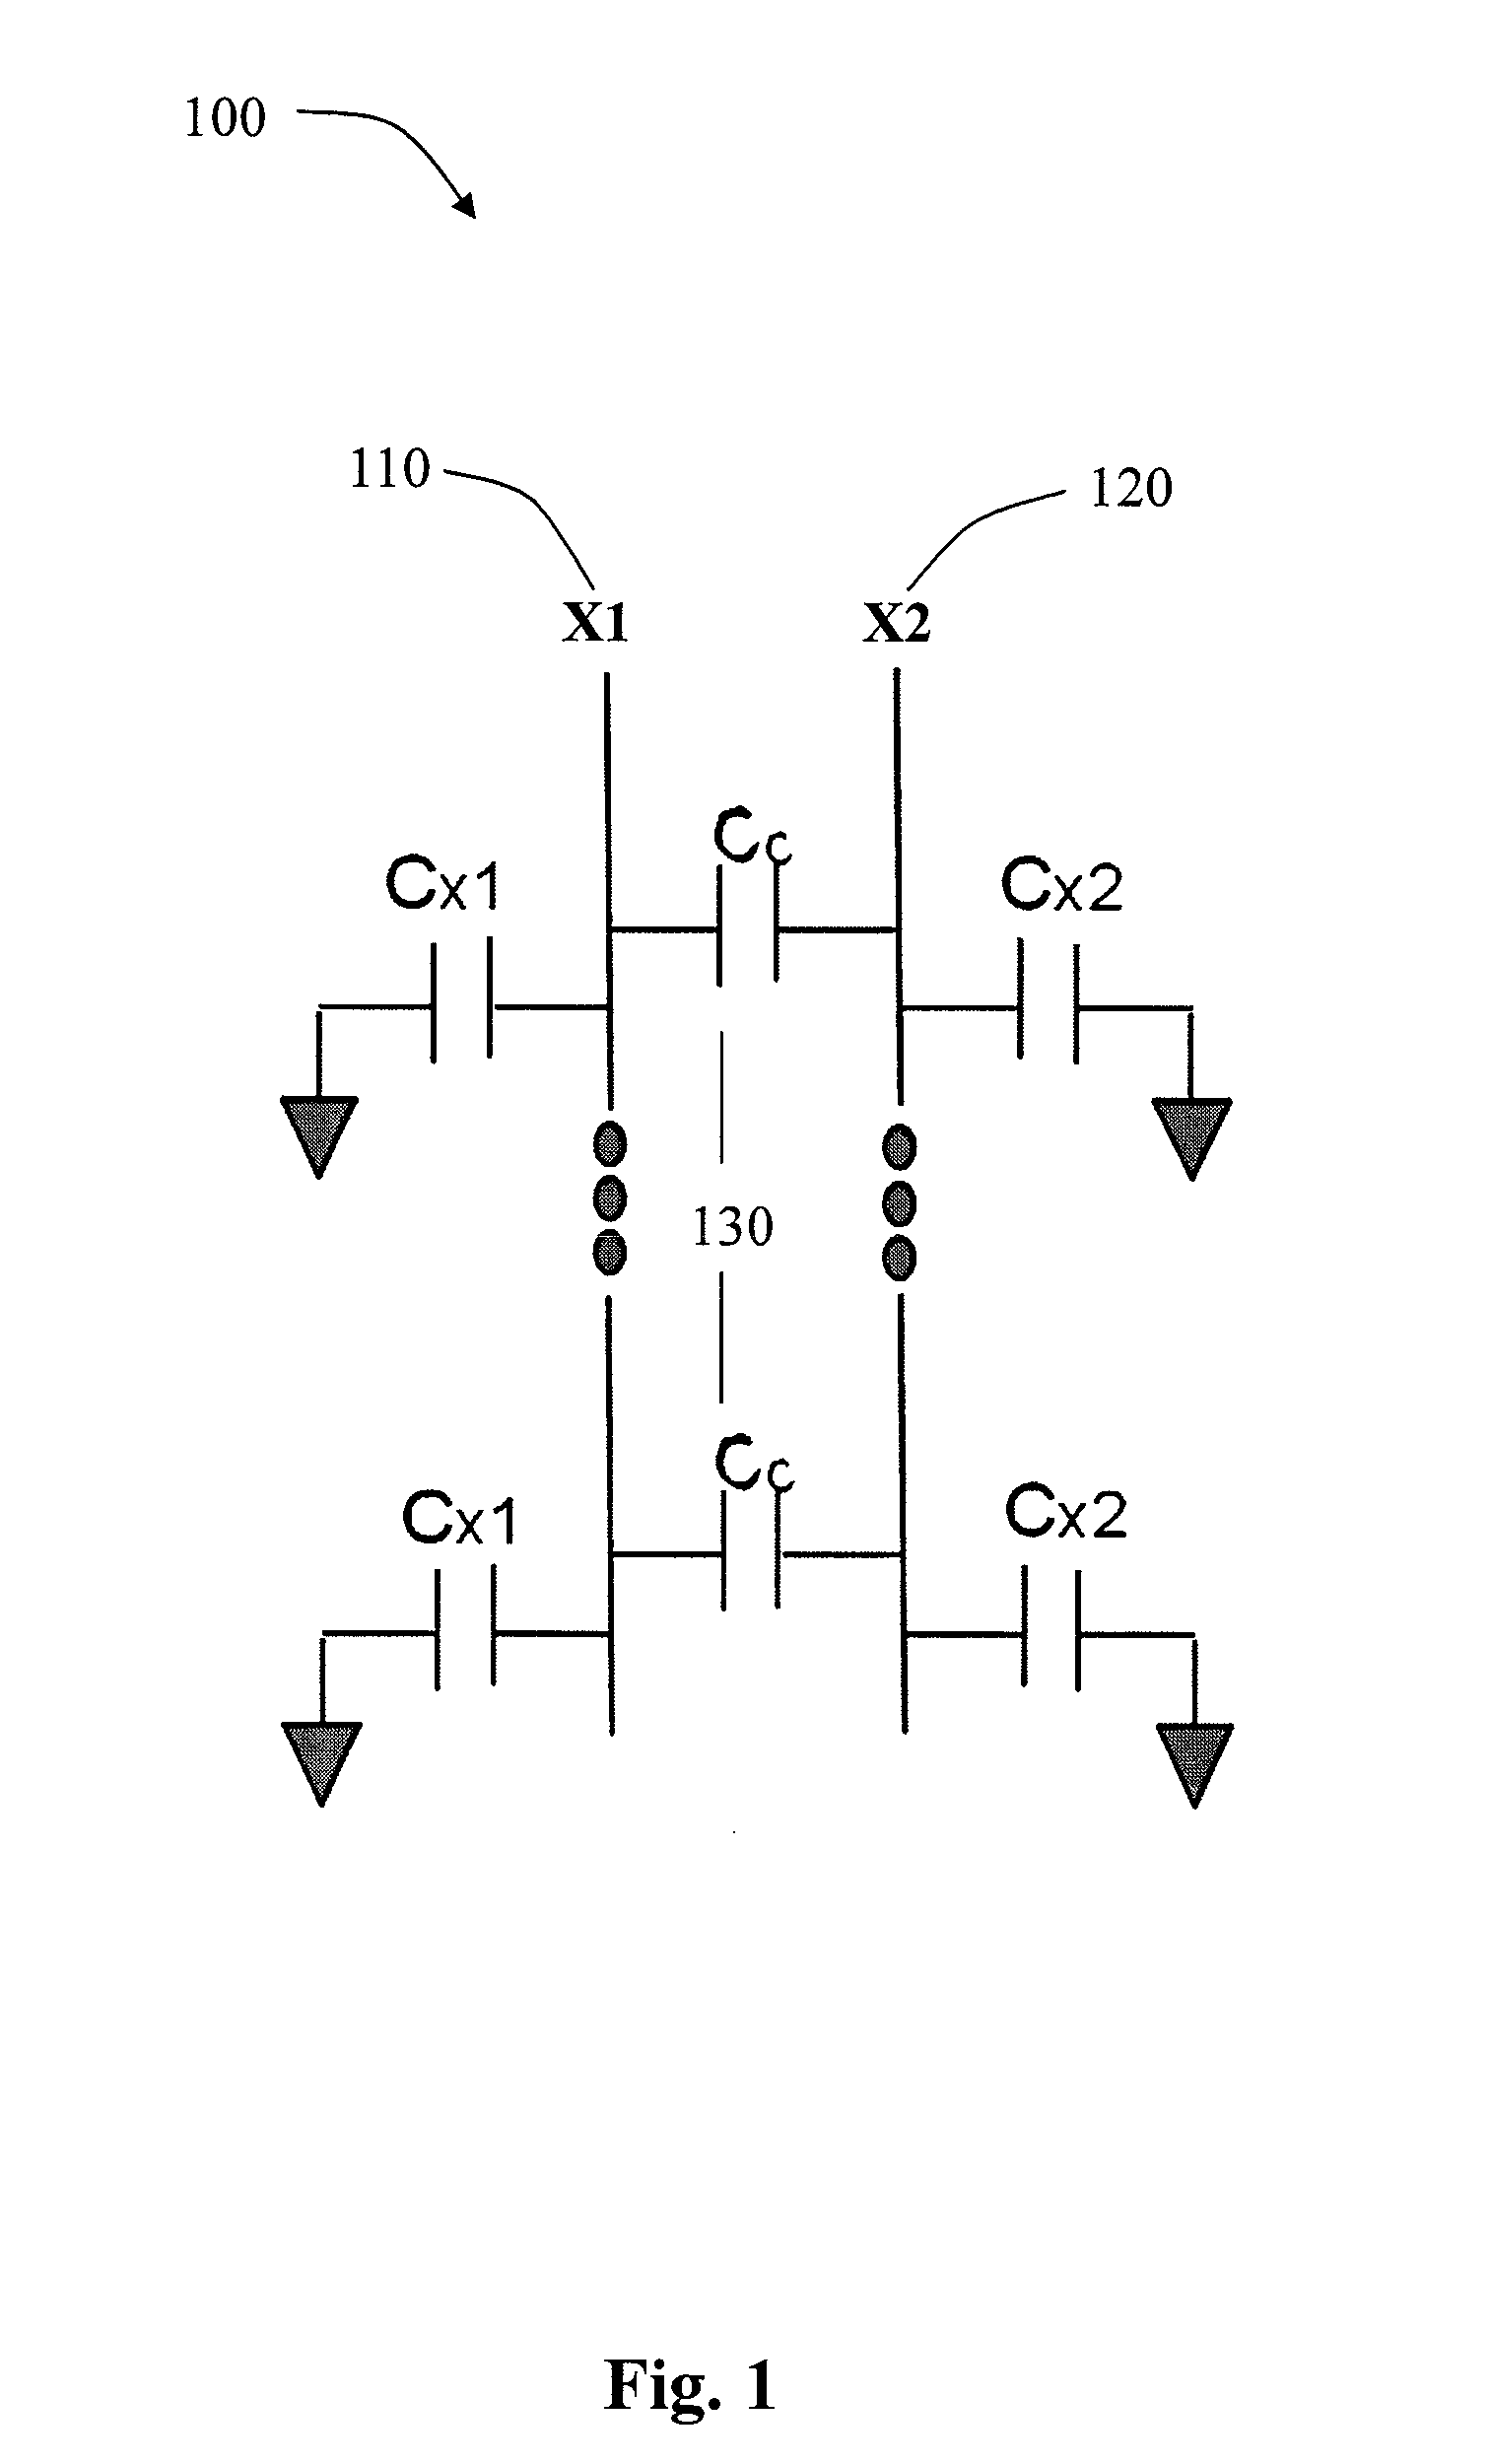 Method and system for an adaptive negative-boost write assist circuit for memory architectures